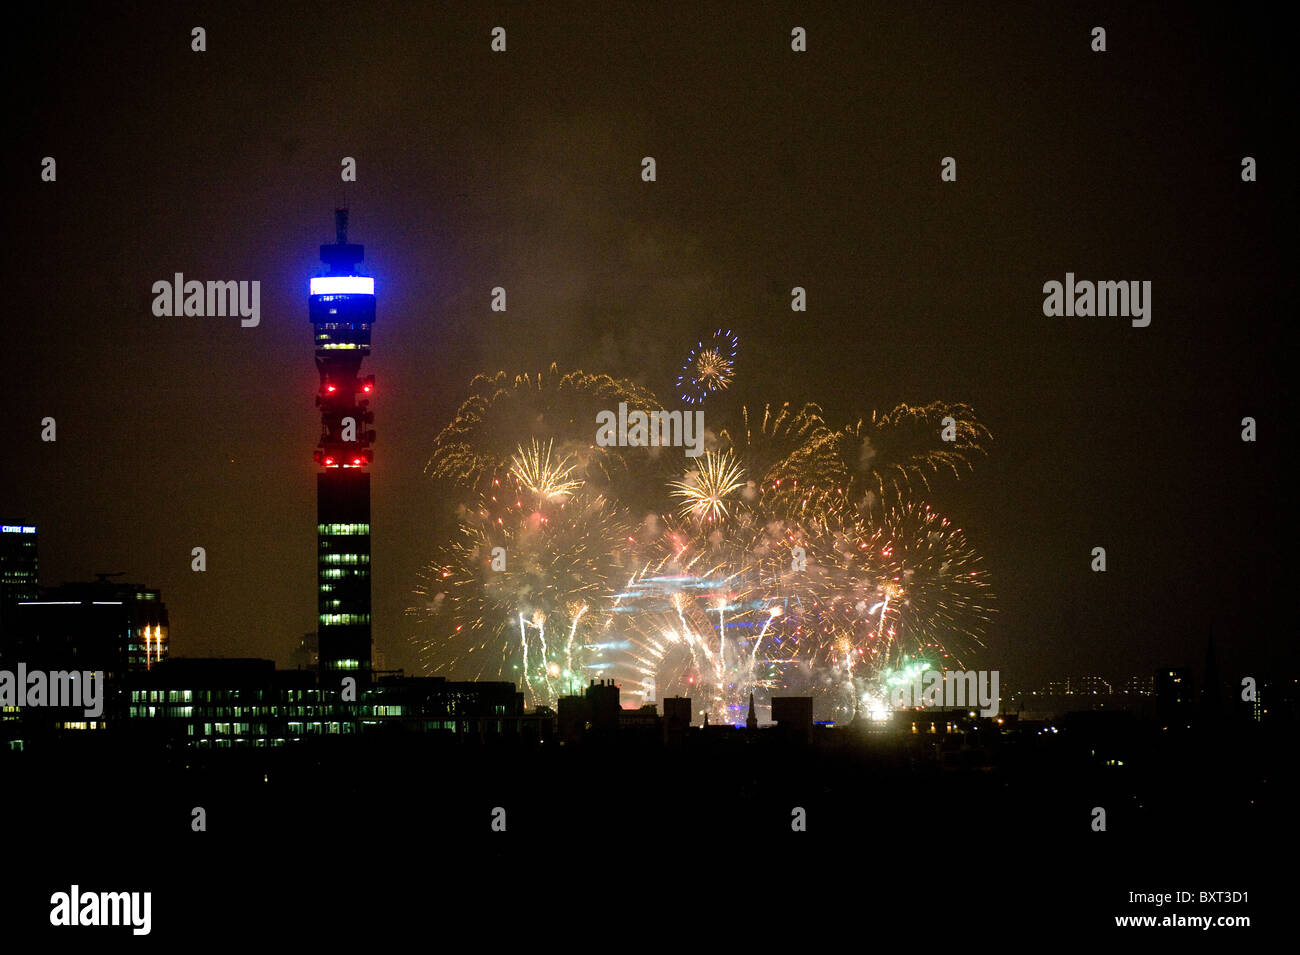 New Year's Eve London fireworks seen from Primrose Hill London with Telecom tower in foreground Stock Photo